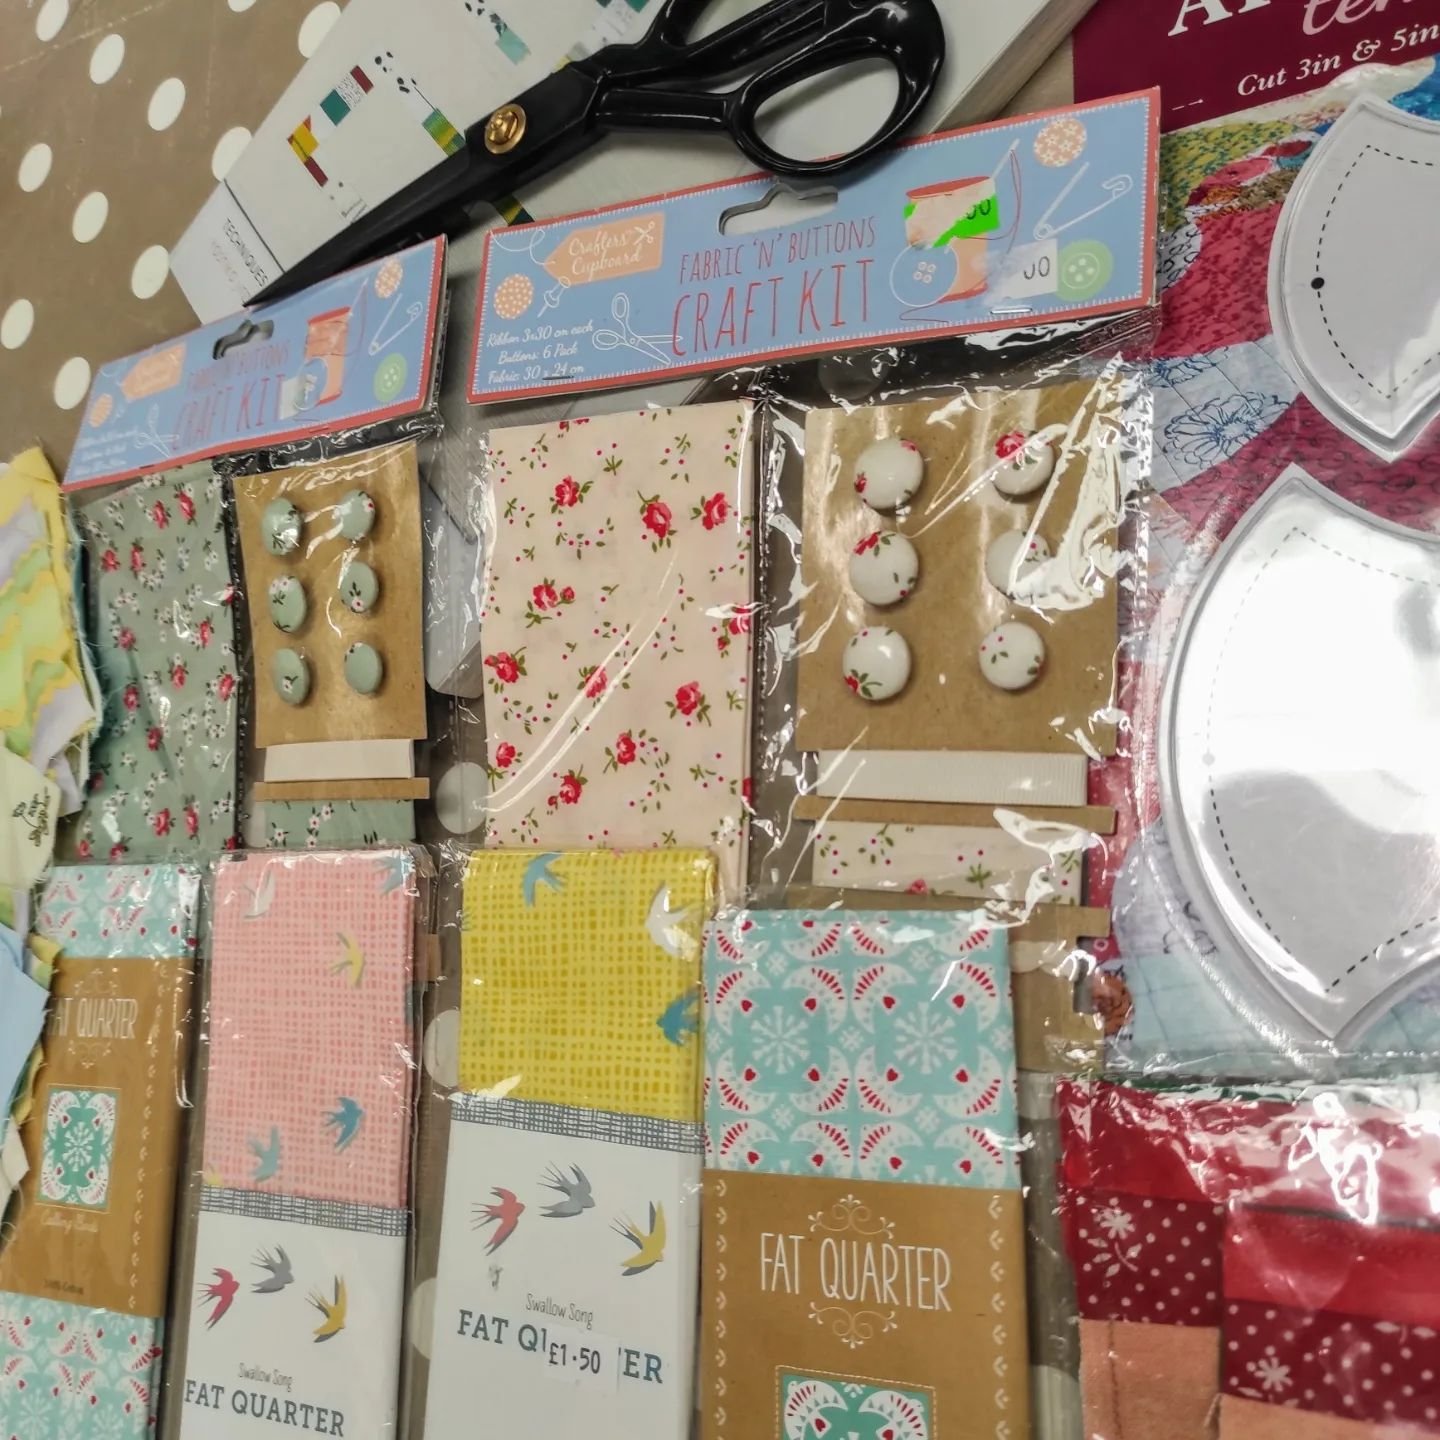 If Quilting is something you are enjoying or maybe considering as a new hobby we have got everything that you need. Fabric, fat quarters, templates, thread and lots of reference books as well. #quilt #quilting #fabric #fatquarterquilt #fatquarter #te